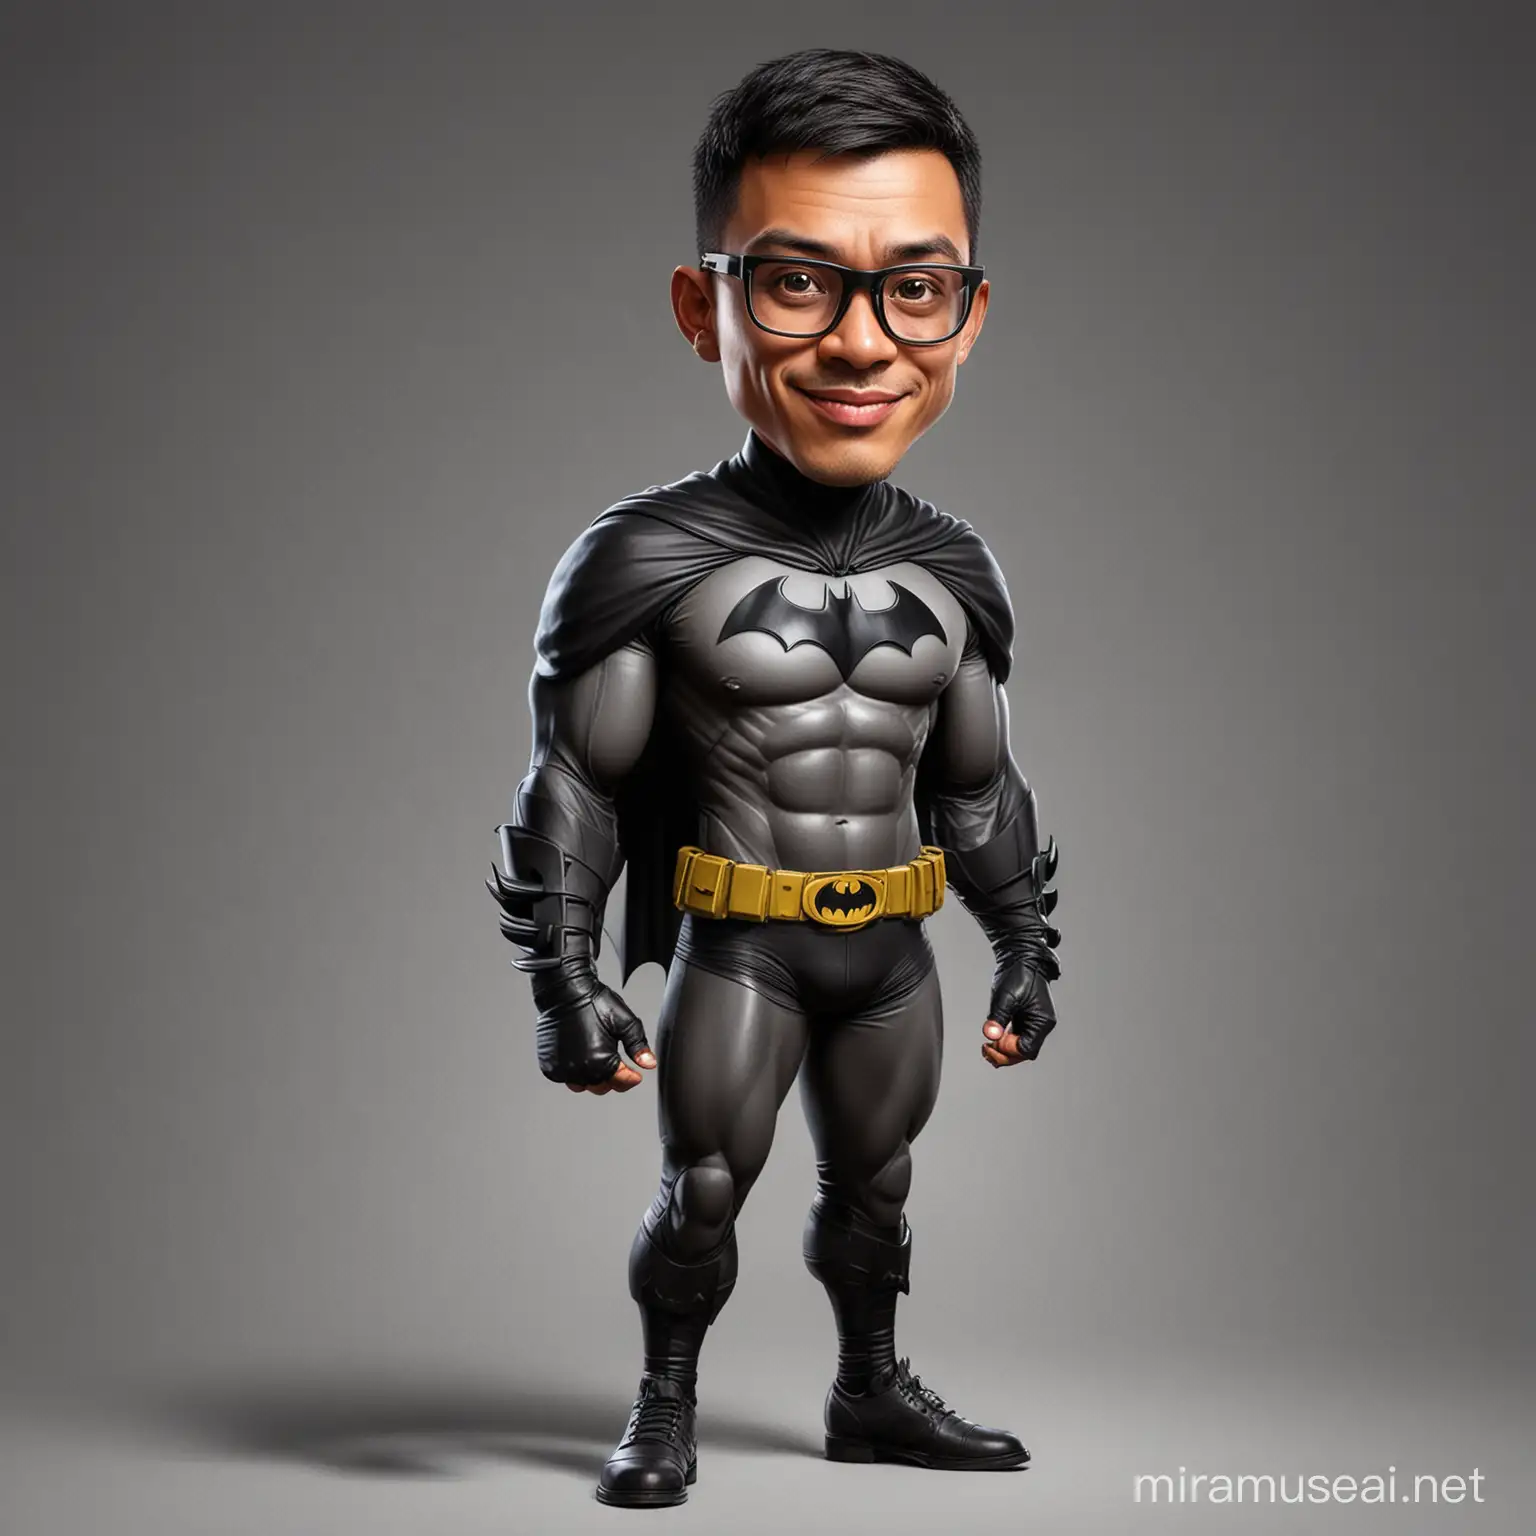 Comicstyle Full Body Caricature Portrait of a 29YearOld Indonesian Man in Batman Costume